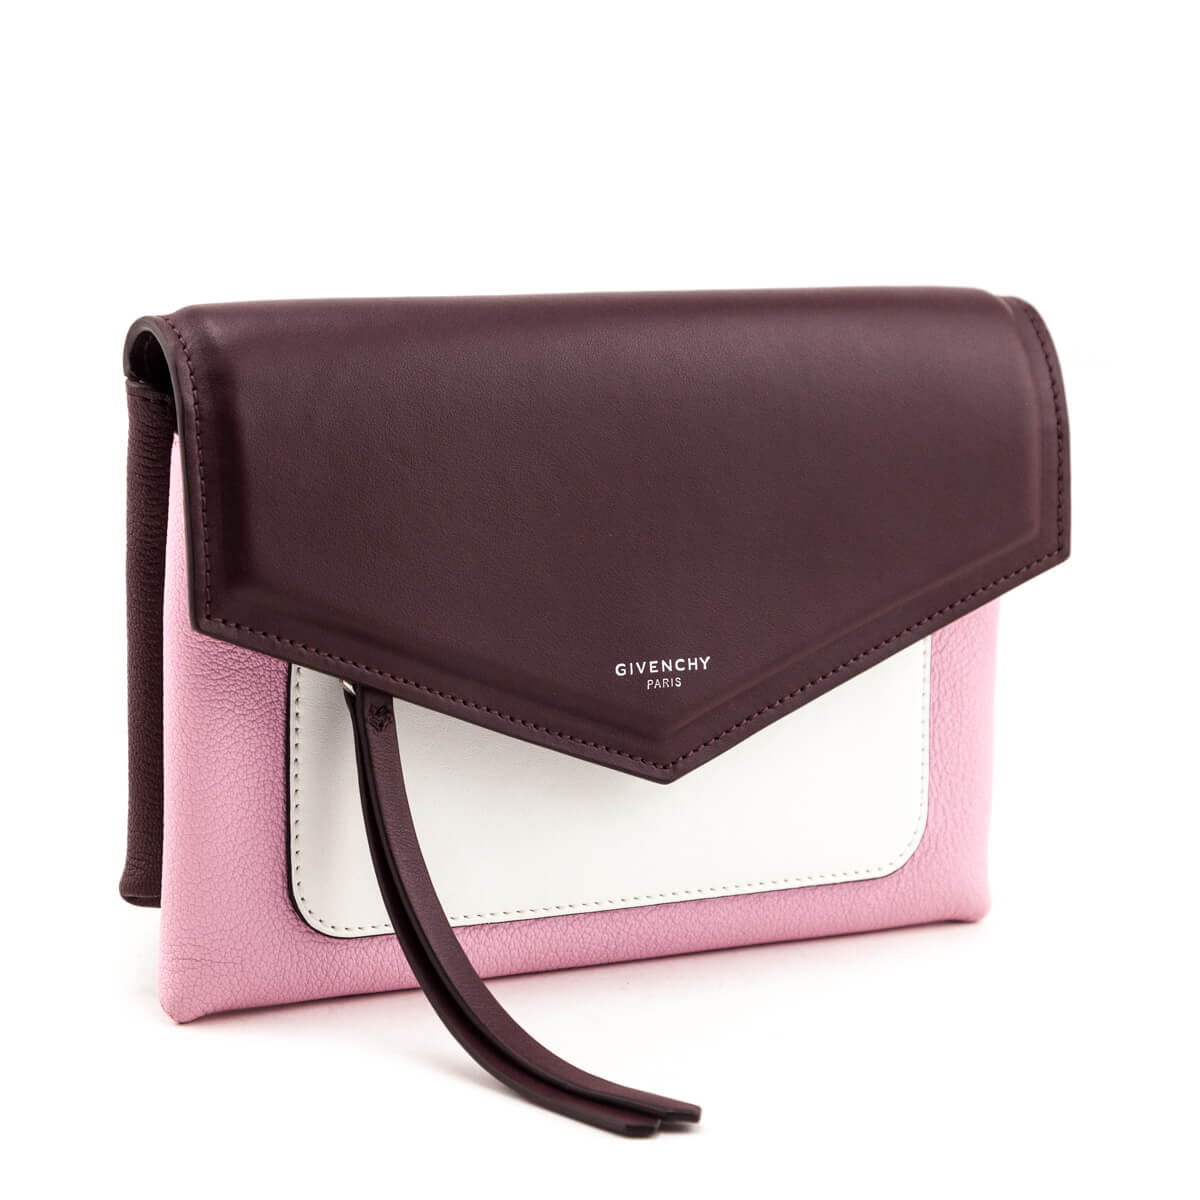 Givenchy Burgundy Tri-Color Crossbody Bag - Love that Bag etc - Preowned Authentic Designer Handbags & Preloved Fashions